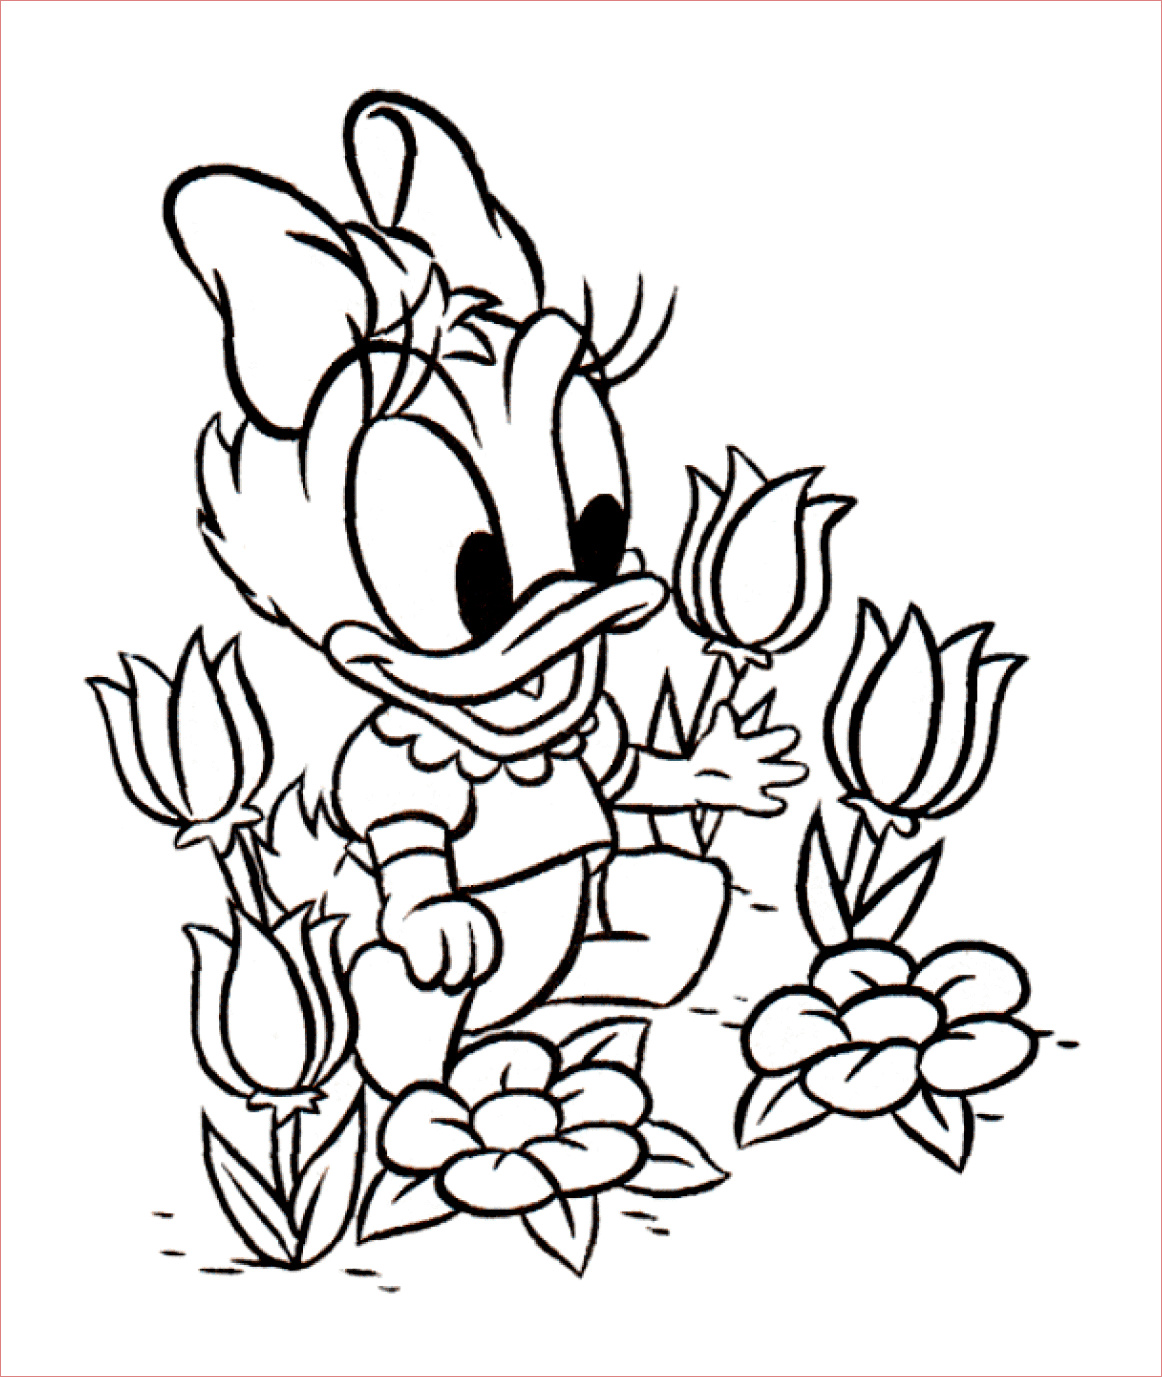 image=daisy Coloring for kids daisy 2